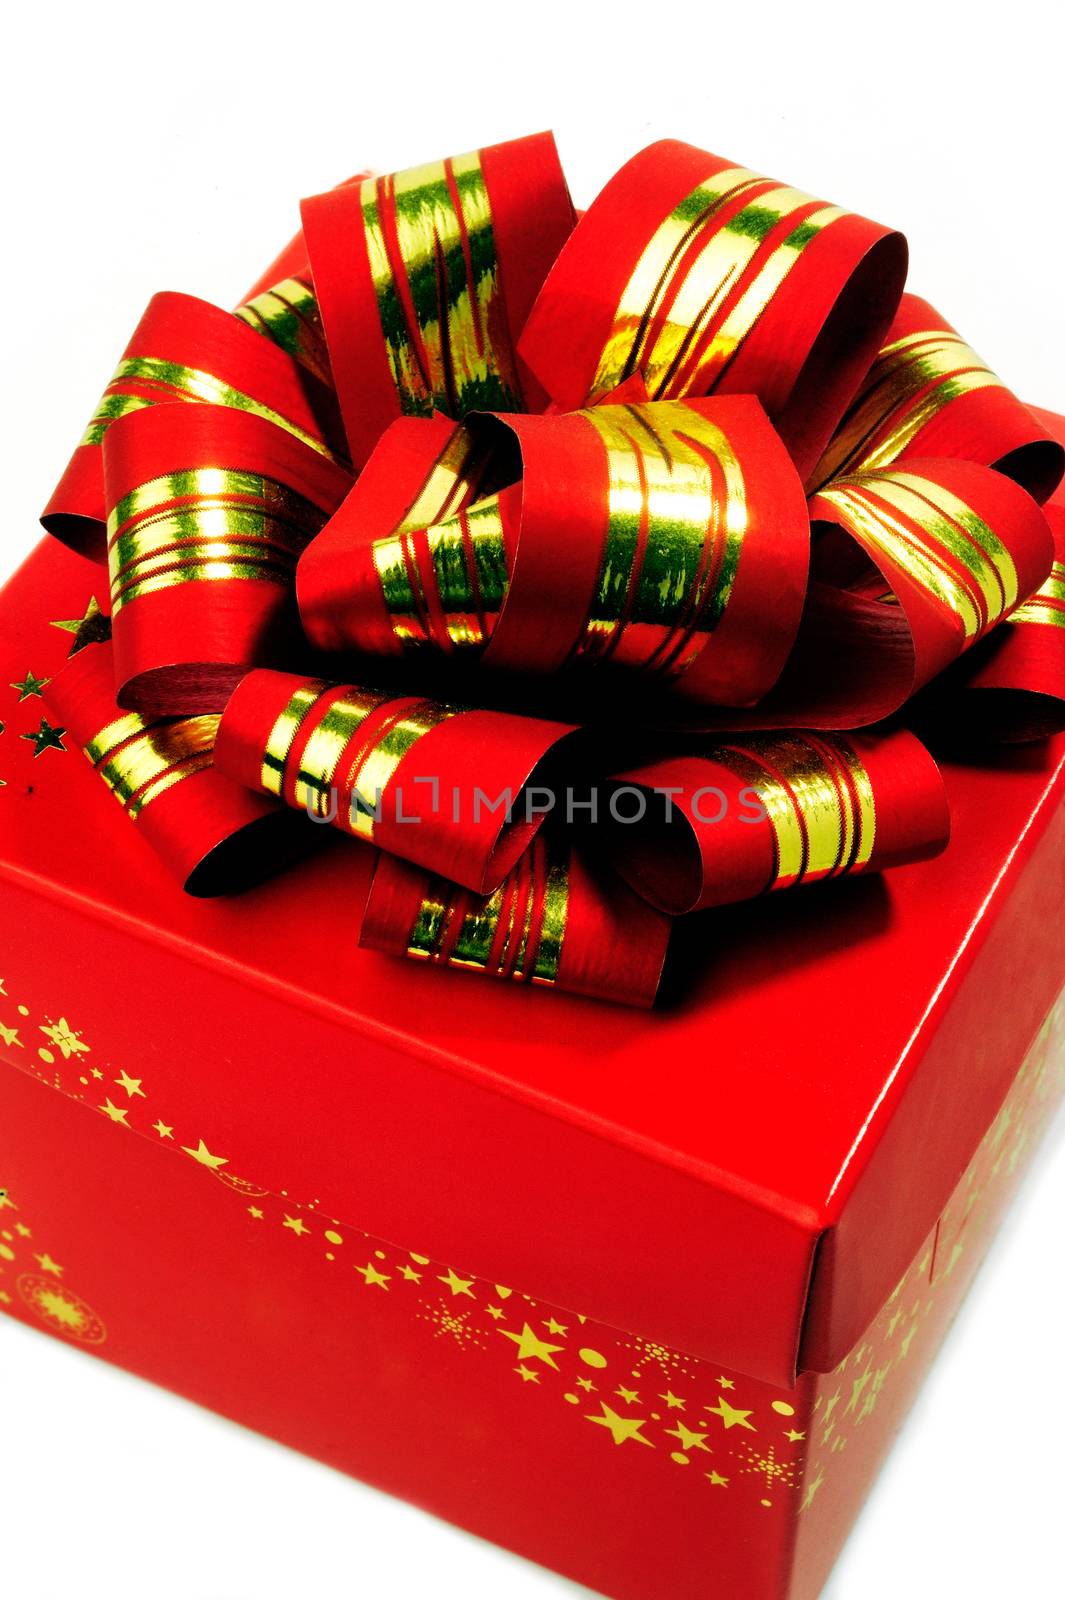 A red gift box with a red bow and gold